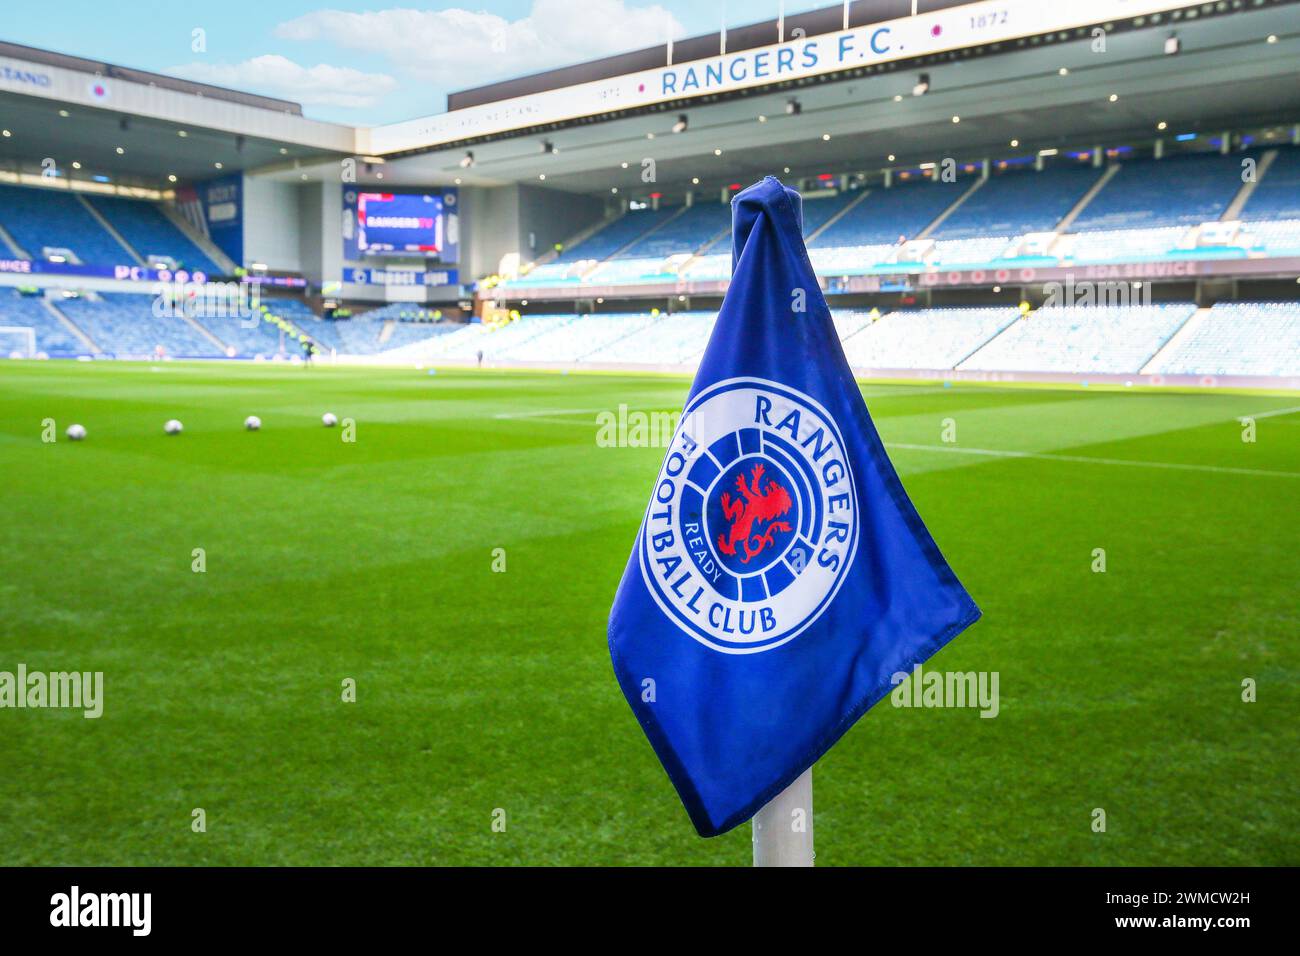 Playing pitch, corner flag and spectator stands inside Ibrox Stadium, home ground of Rangers Football Club, Glasgow, Scotland, UK Stock Photo